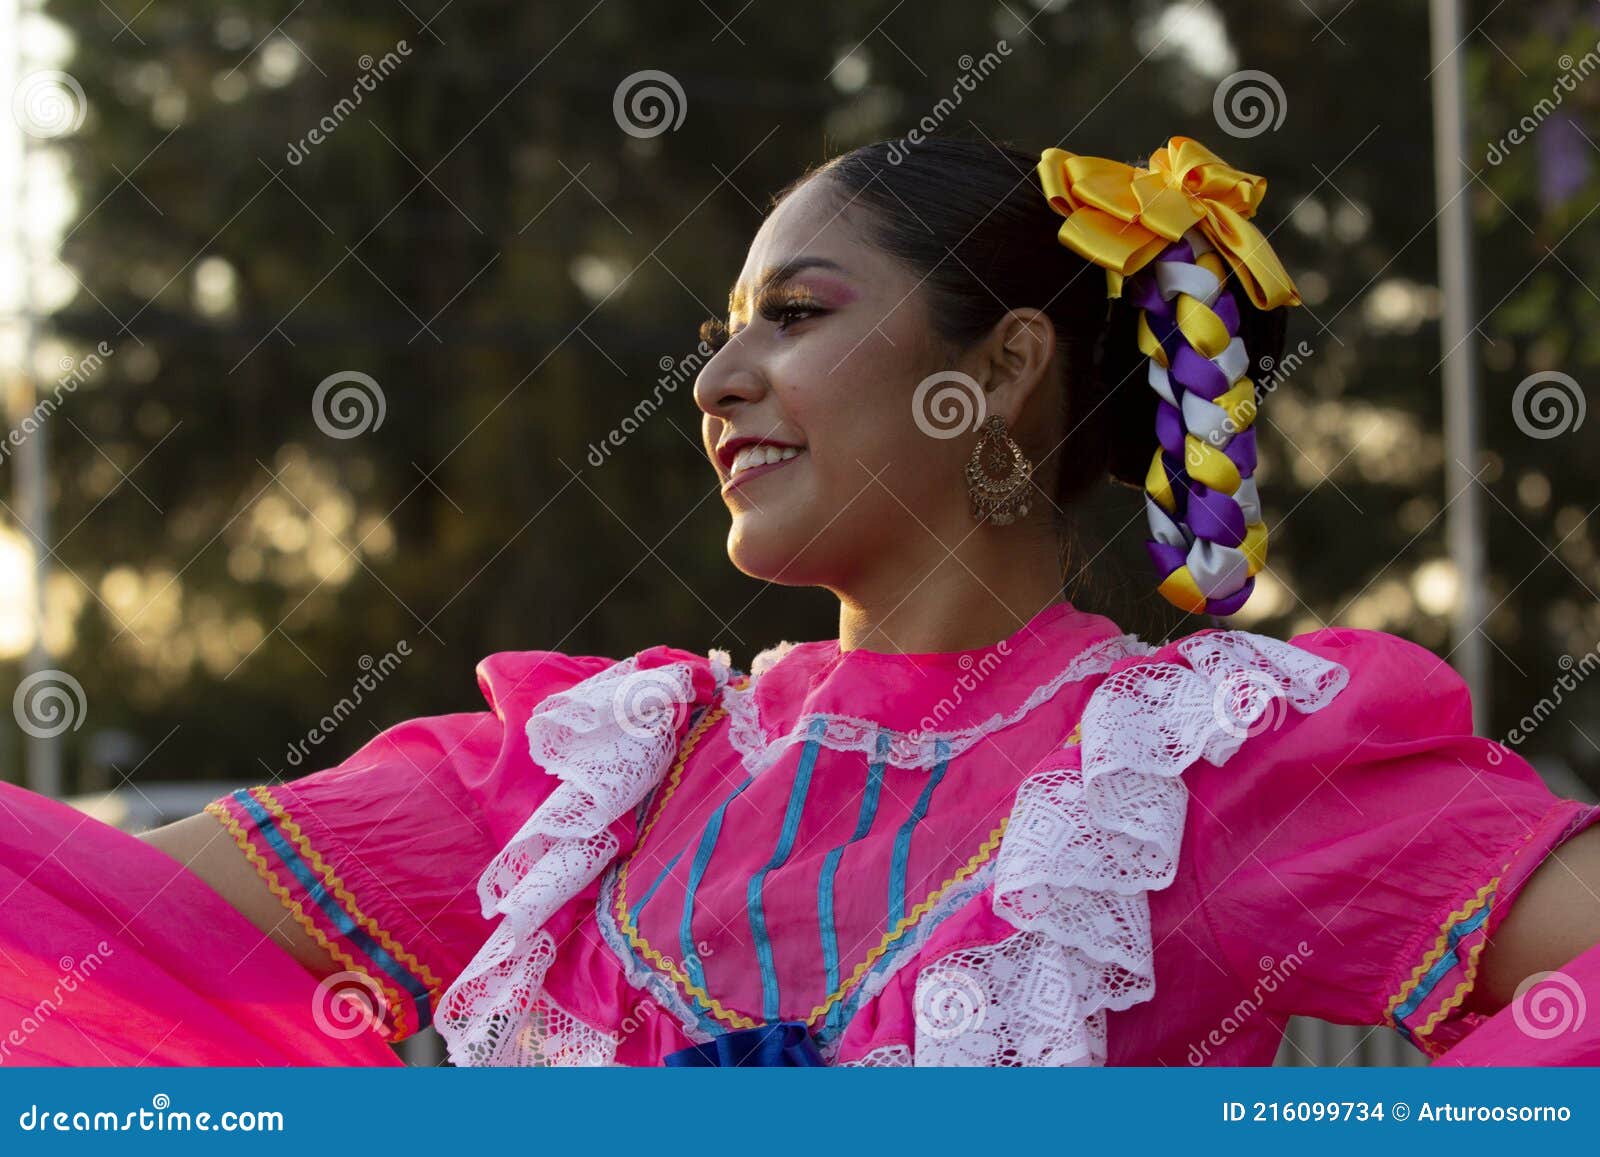 mexican folkloric dancer with traditional costume